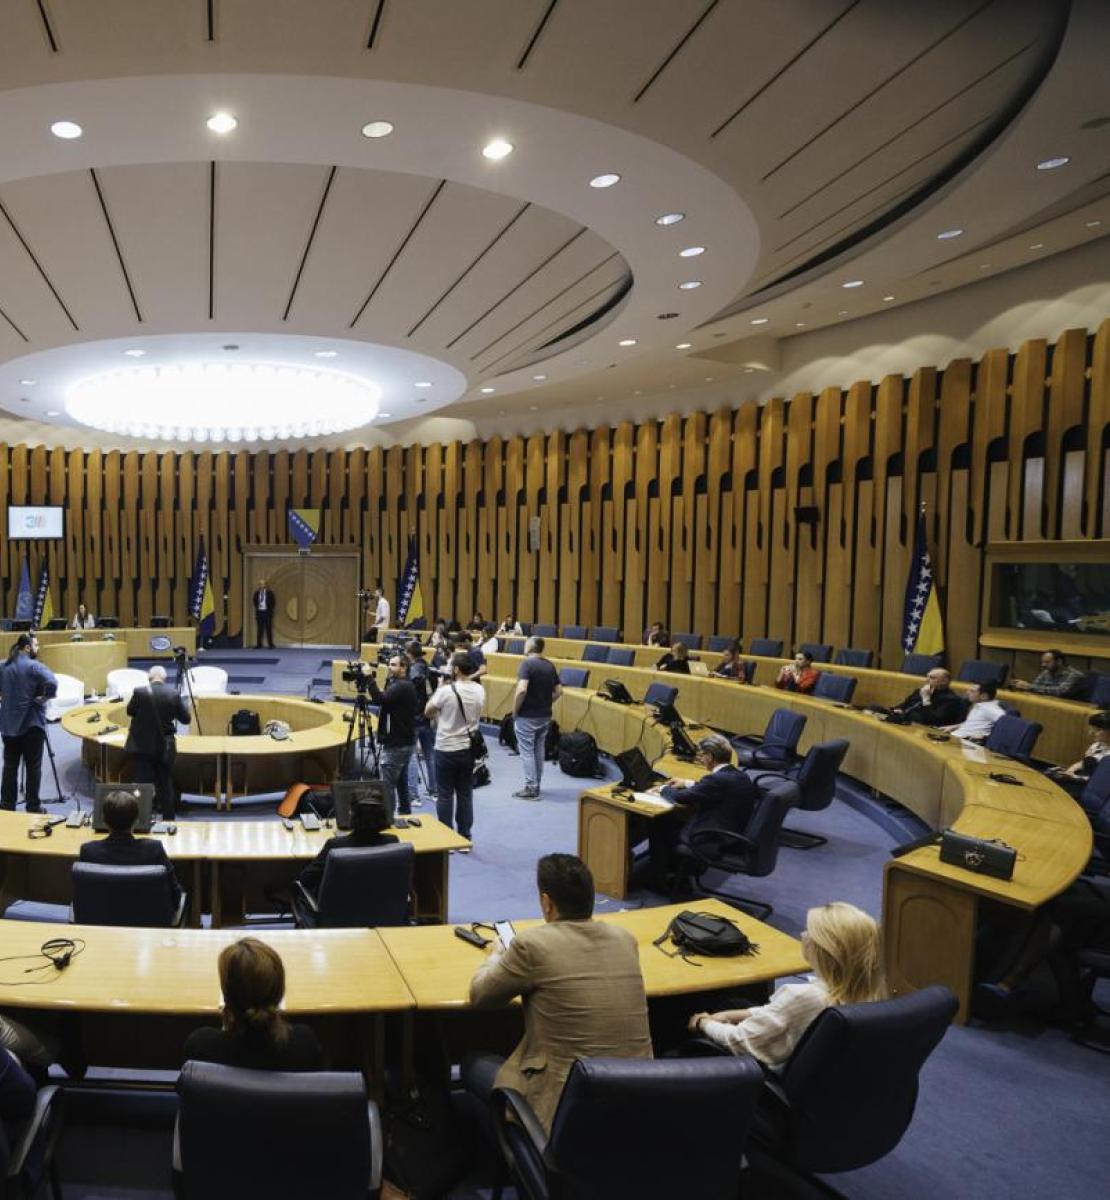 A ceremony takes place in the Parliamentary Assembly in Sarajevo to mark the 30th anniversary of Bosnia and Herzegovina’s accession to the United Nations. 